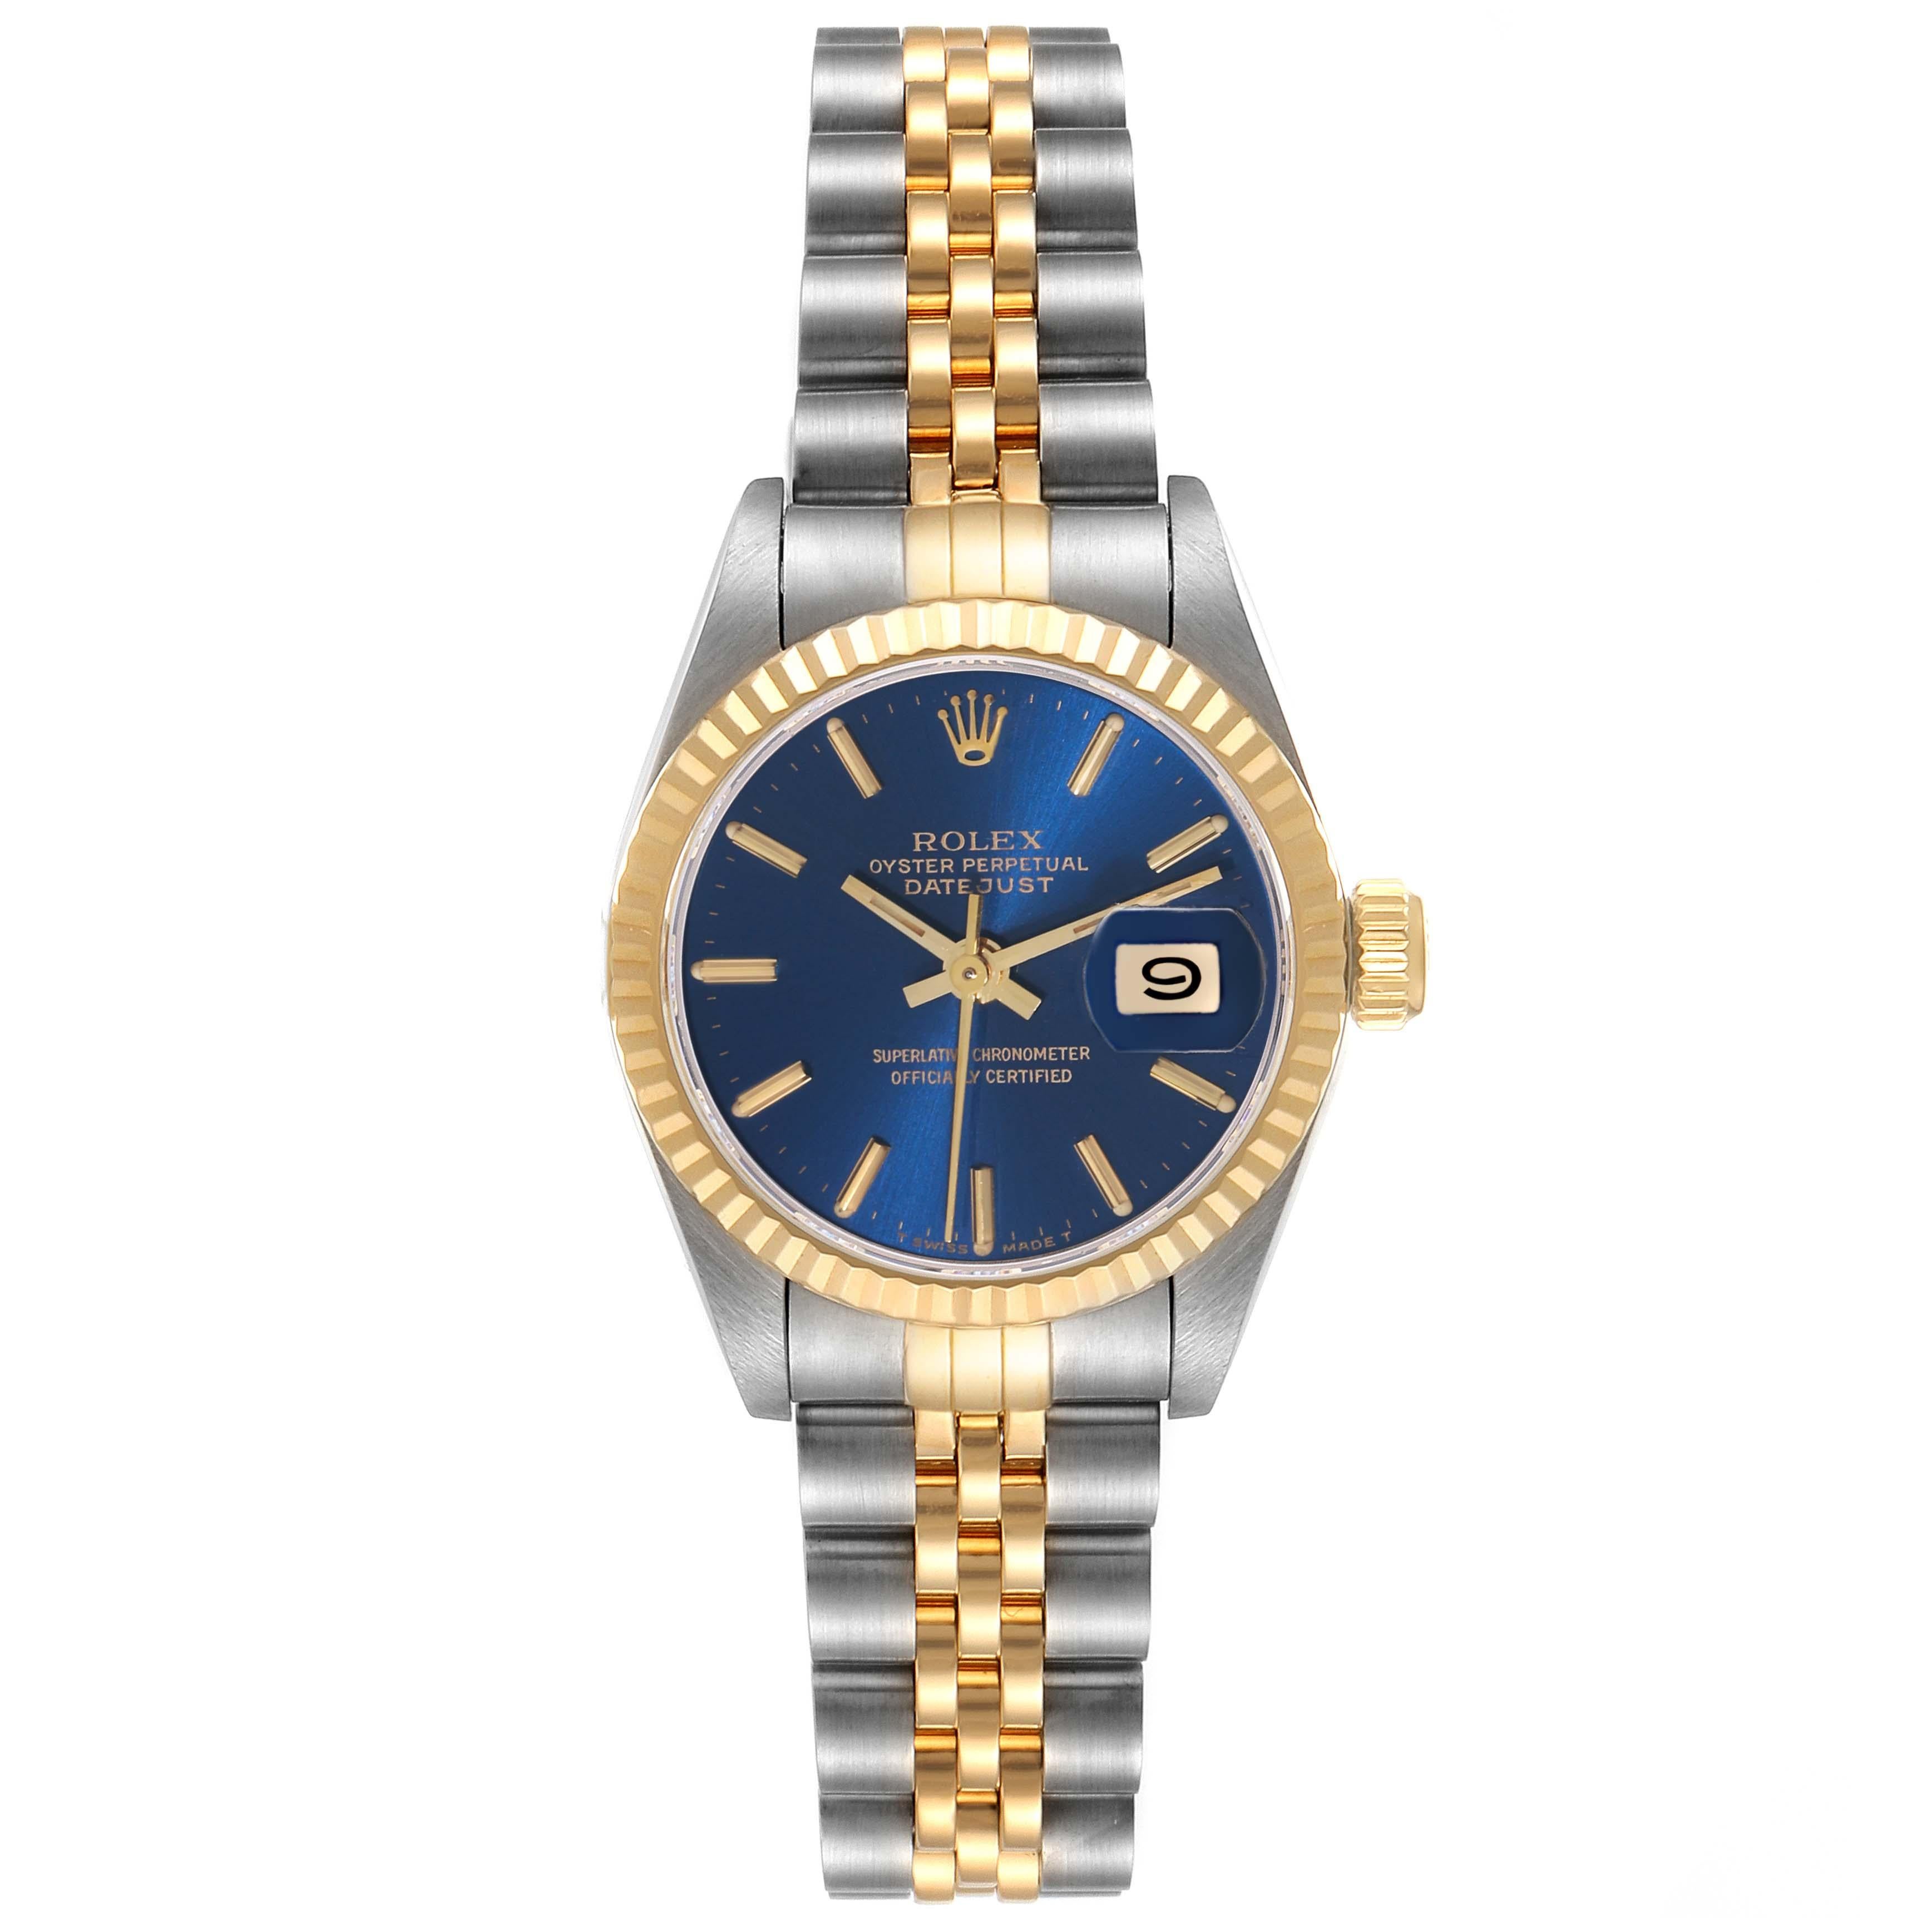 Rolex Datejust Blue Dial Steel Yellow Gold Ladies Watch 69173. Officially certified chronometer automatic self-winding movement. Stainless steel oyster case 26.0 mm in diameter. Rolex logo on the crown. 18k yellow gold fluted bezel. Scratch